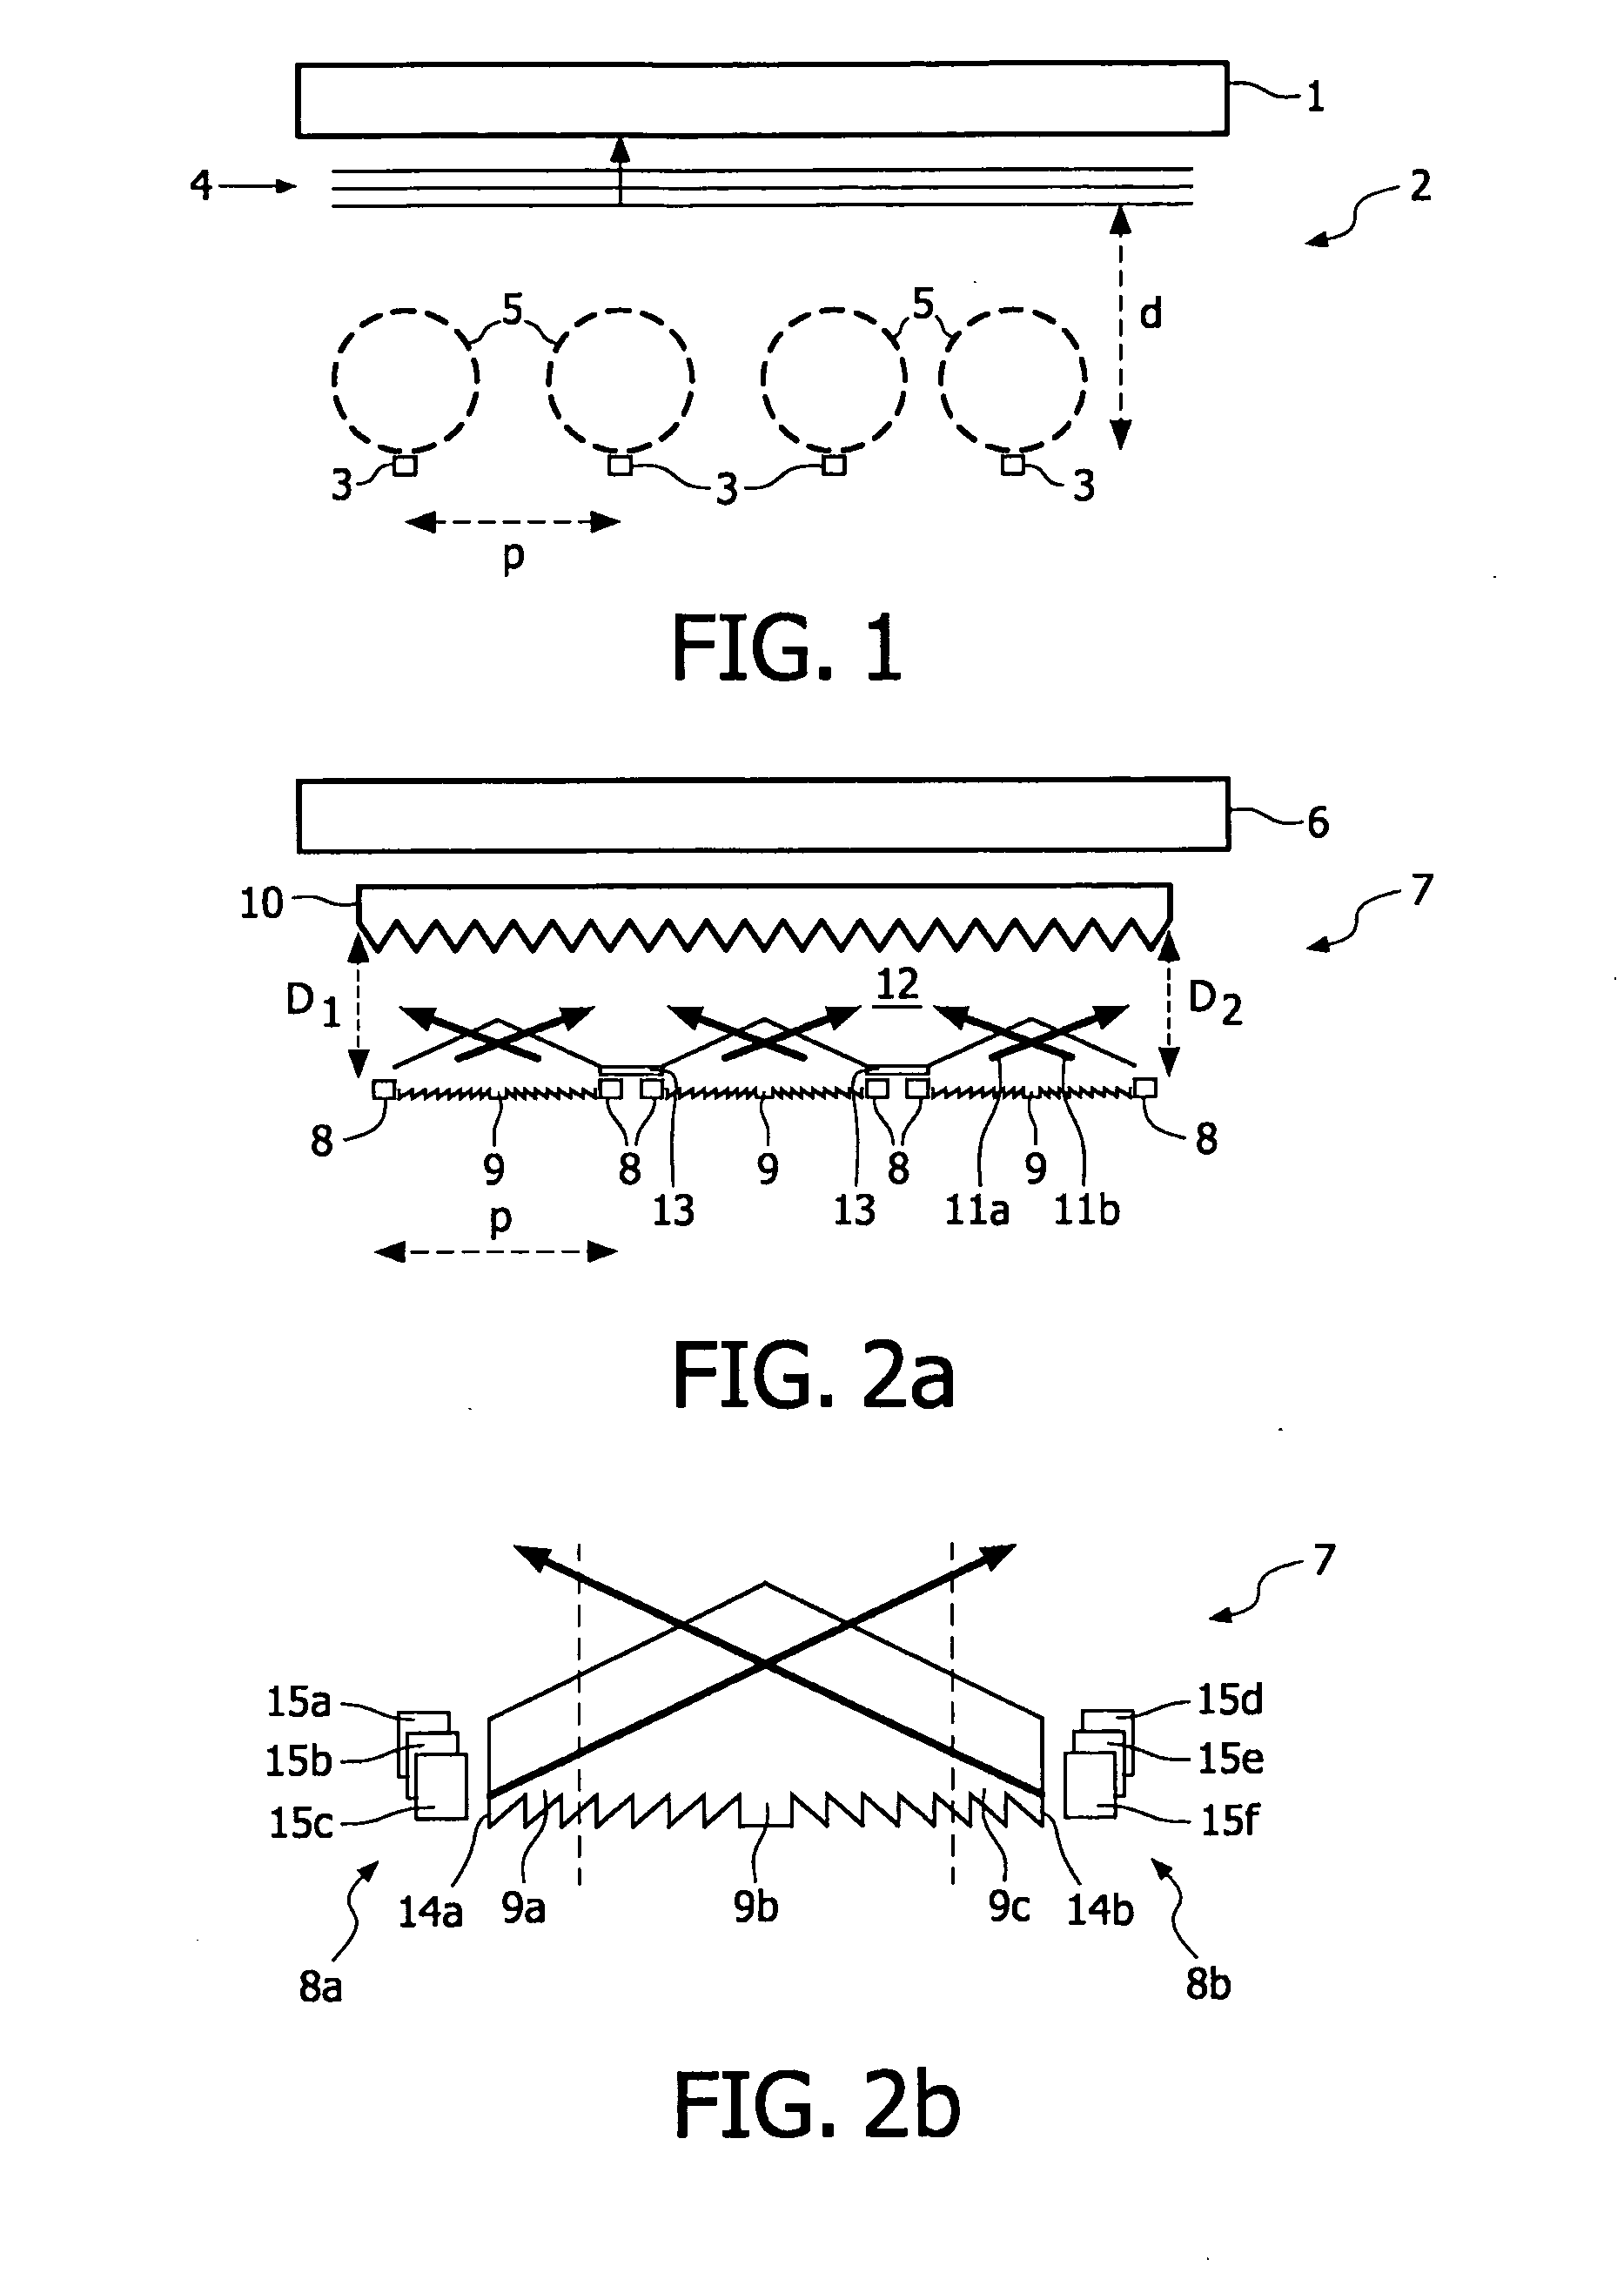 Illumination system for illuminating a display device, and display device